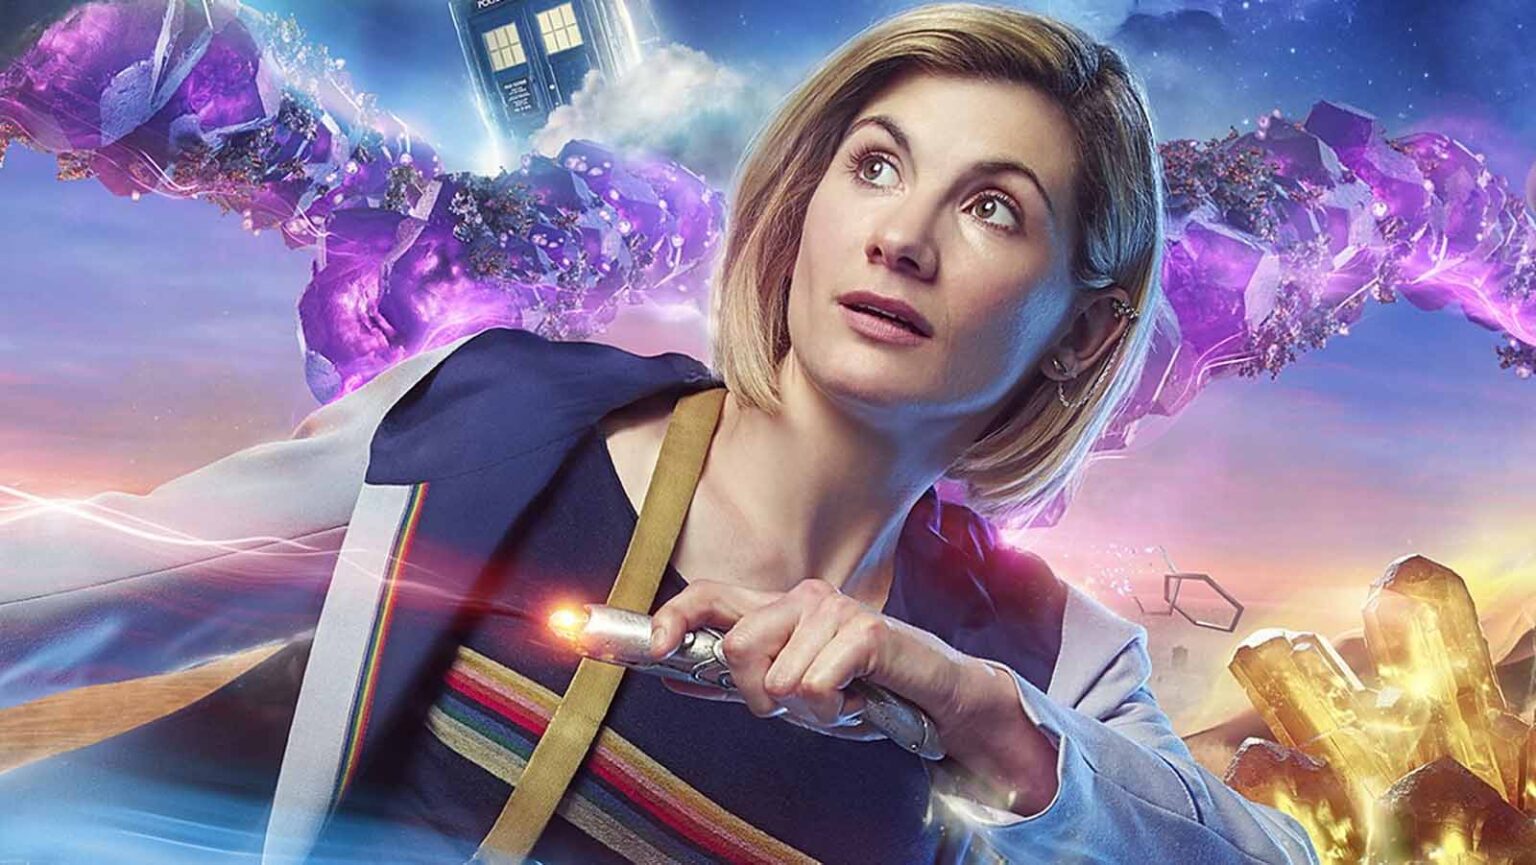 Jodie Whittaker has officially stepped away from the Time Lords. So who will the next 'Doctor Who' be? Take a look at season 13's latest rumors.